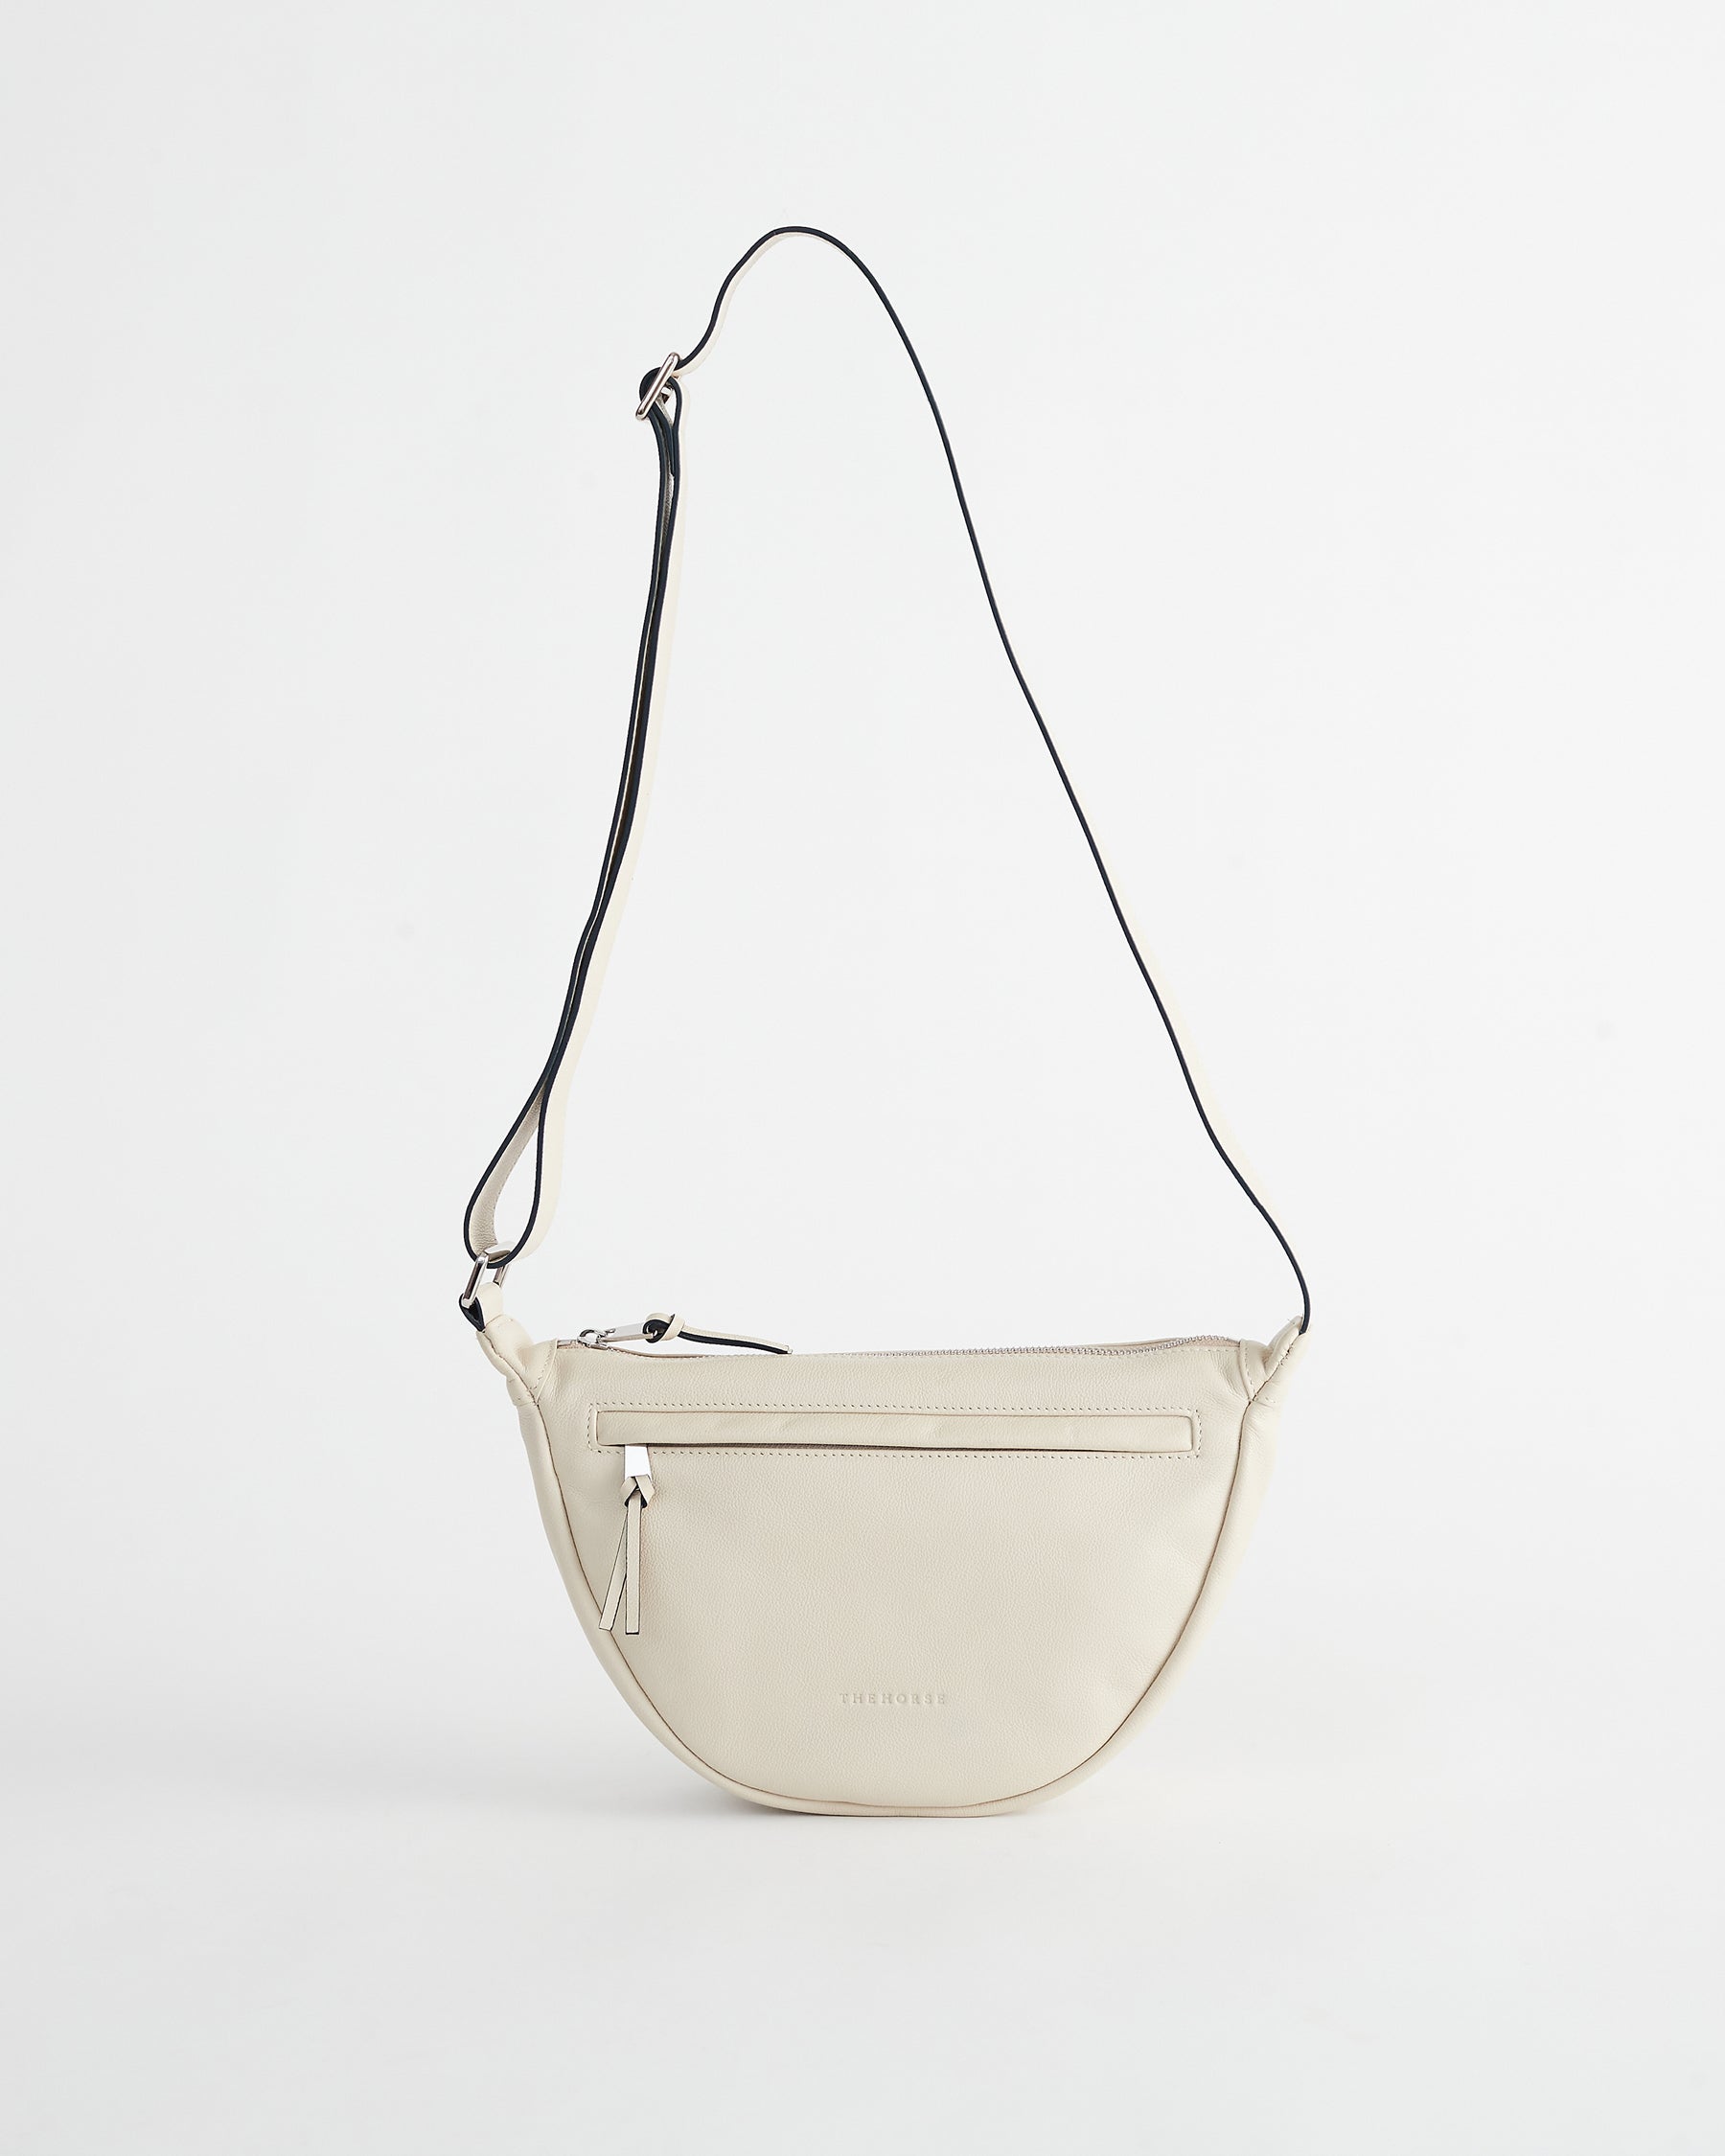 The Leather Sporty Crossbody Bag in Oat by The Horse®